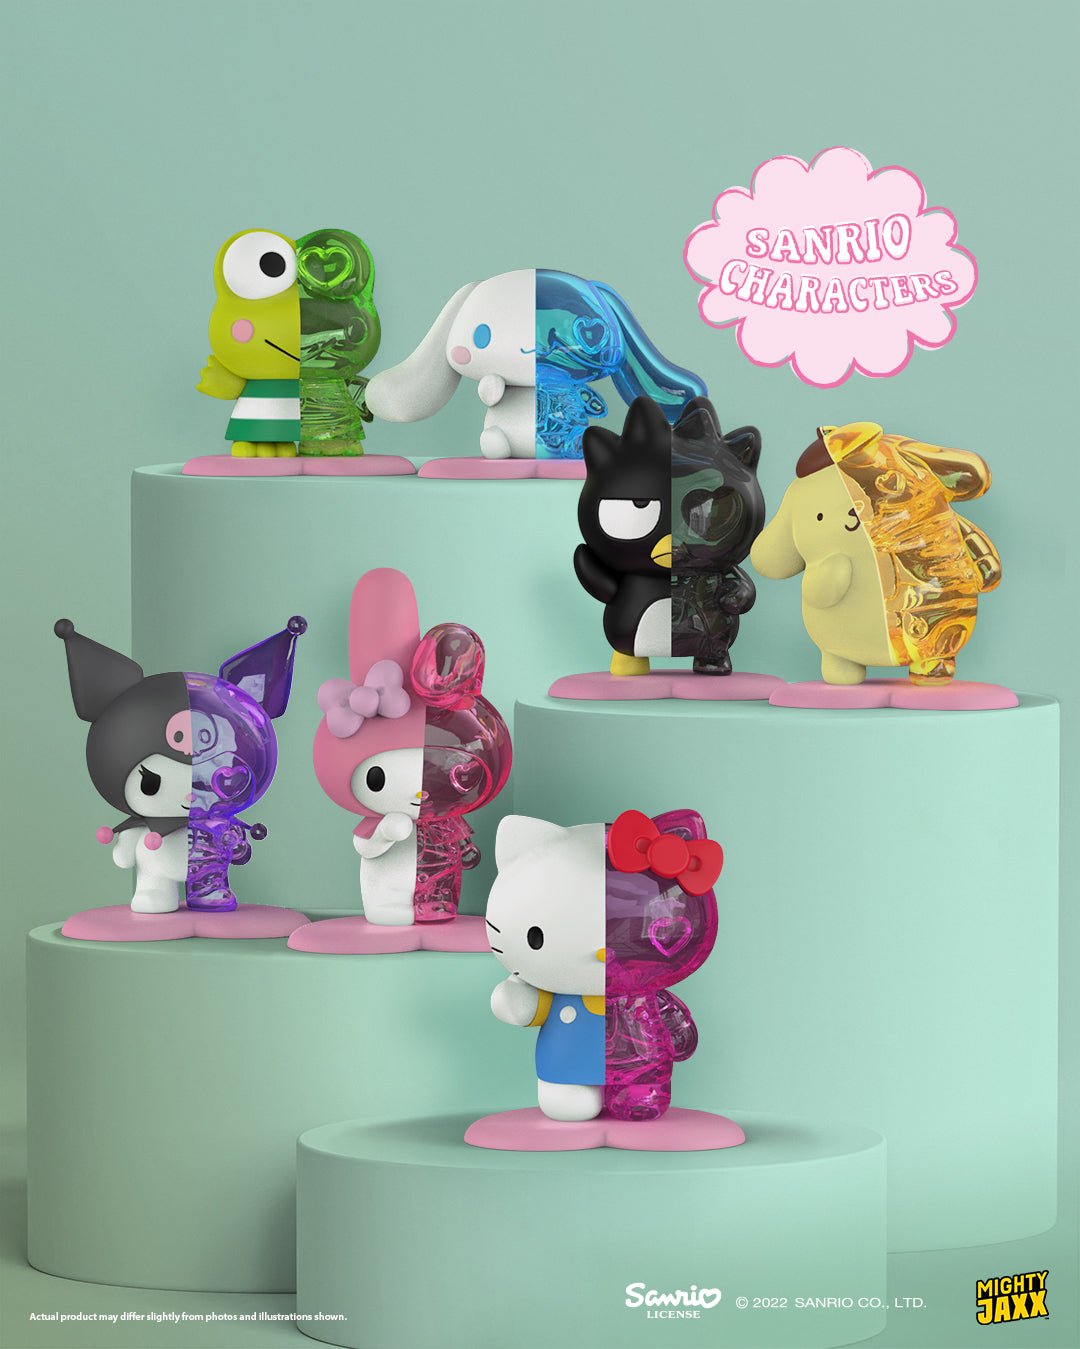 Kandy X Sanrio (Featuring Jason Freeny): Blind Box Figure - The Fourth Place